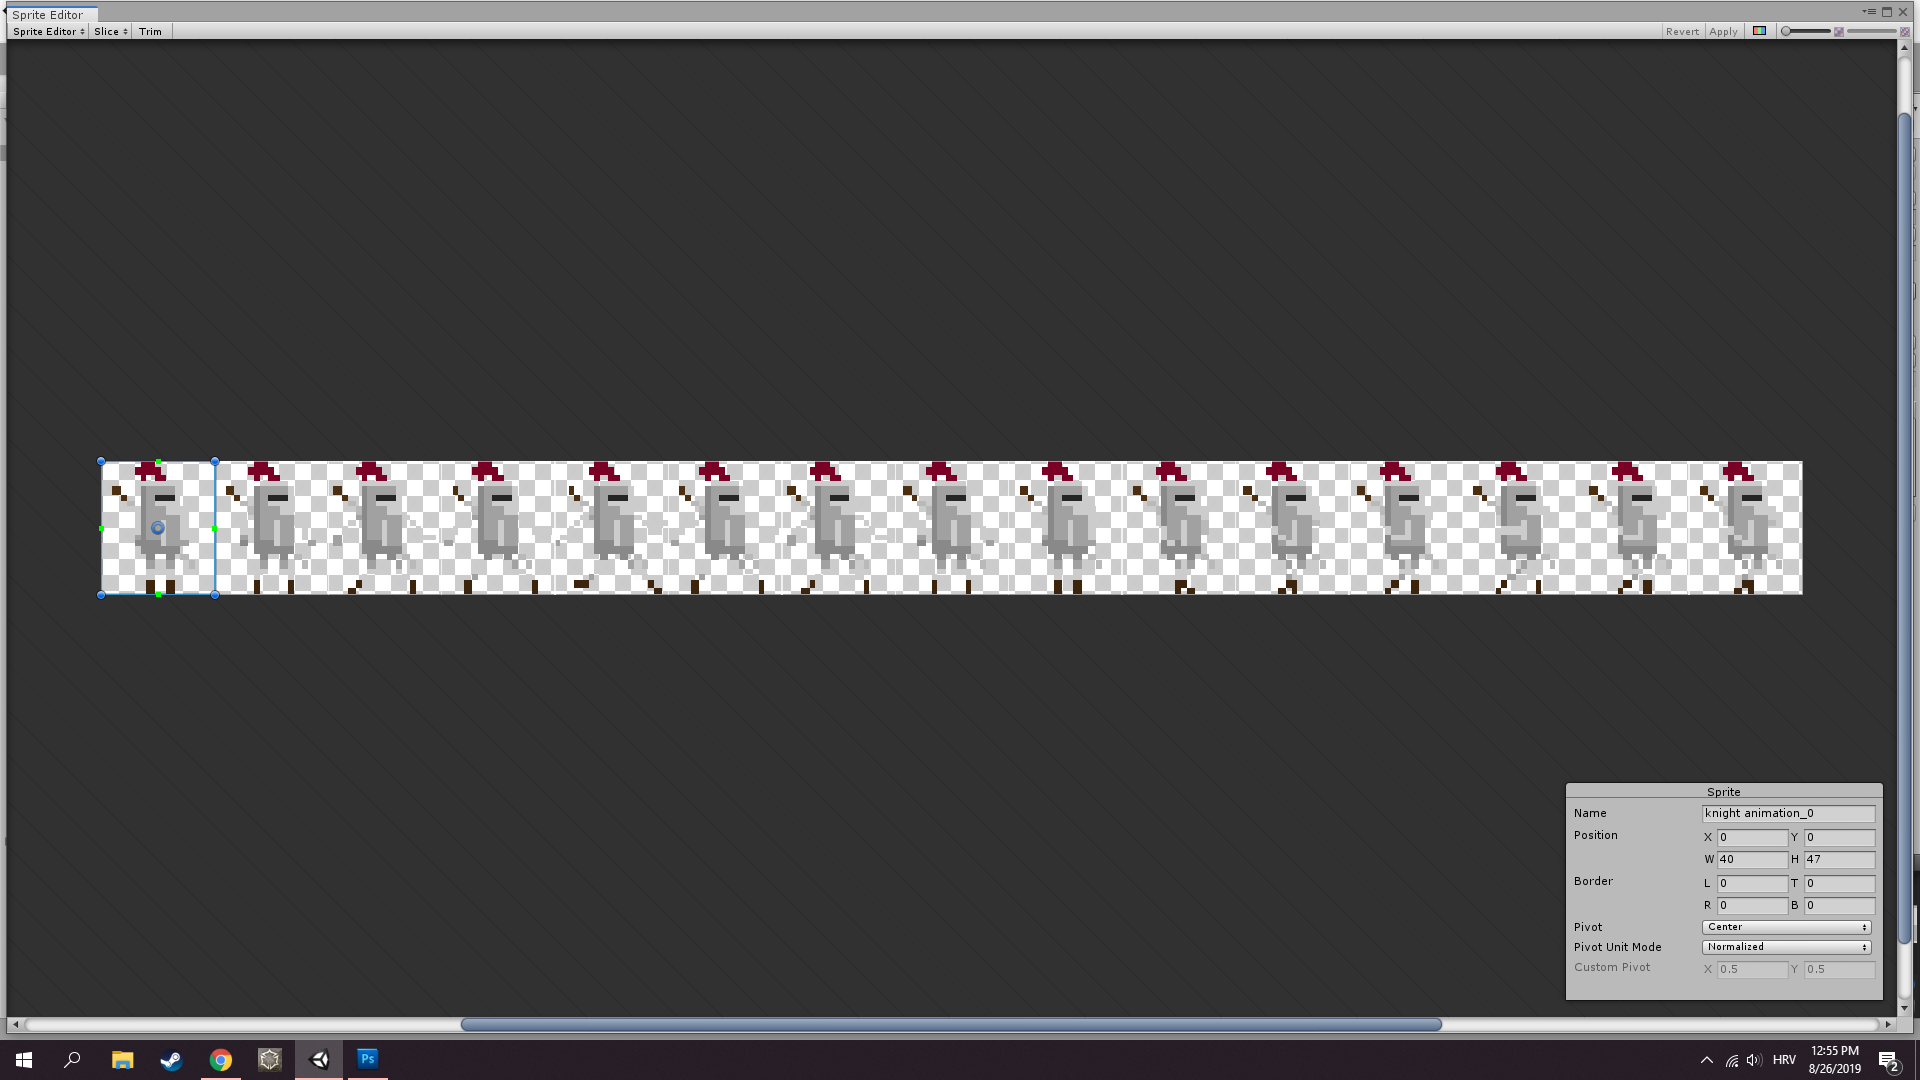 This is how the sprite sheet looks and look for first frame, you'll se why in a sec